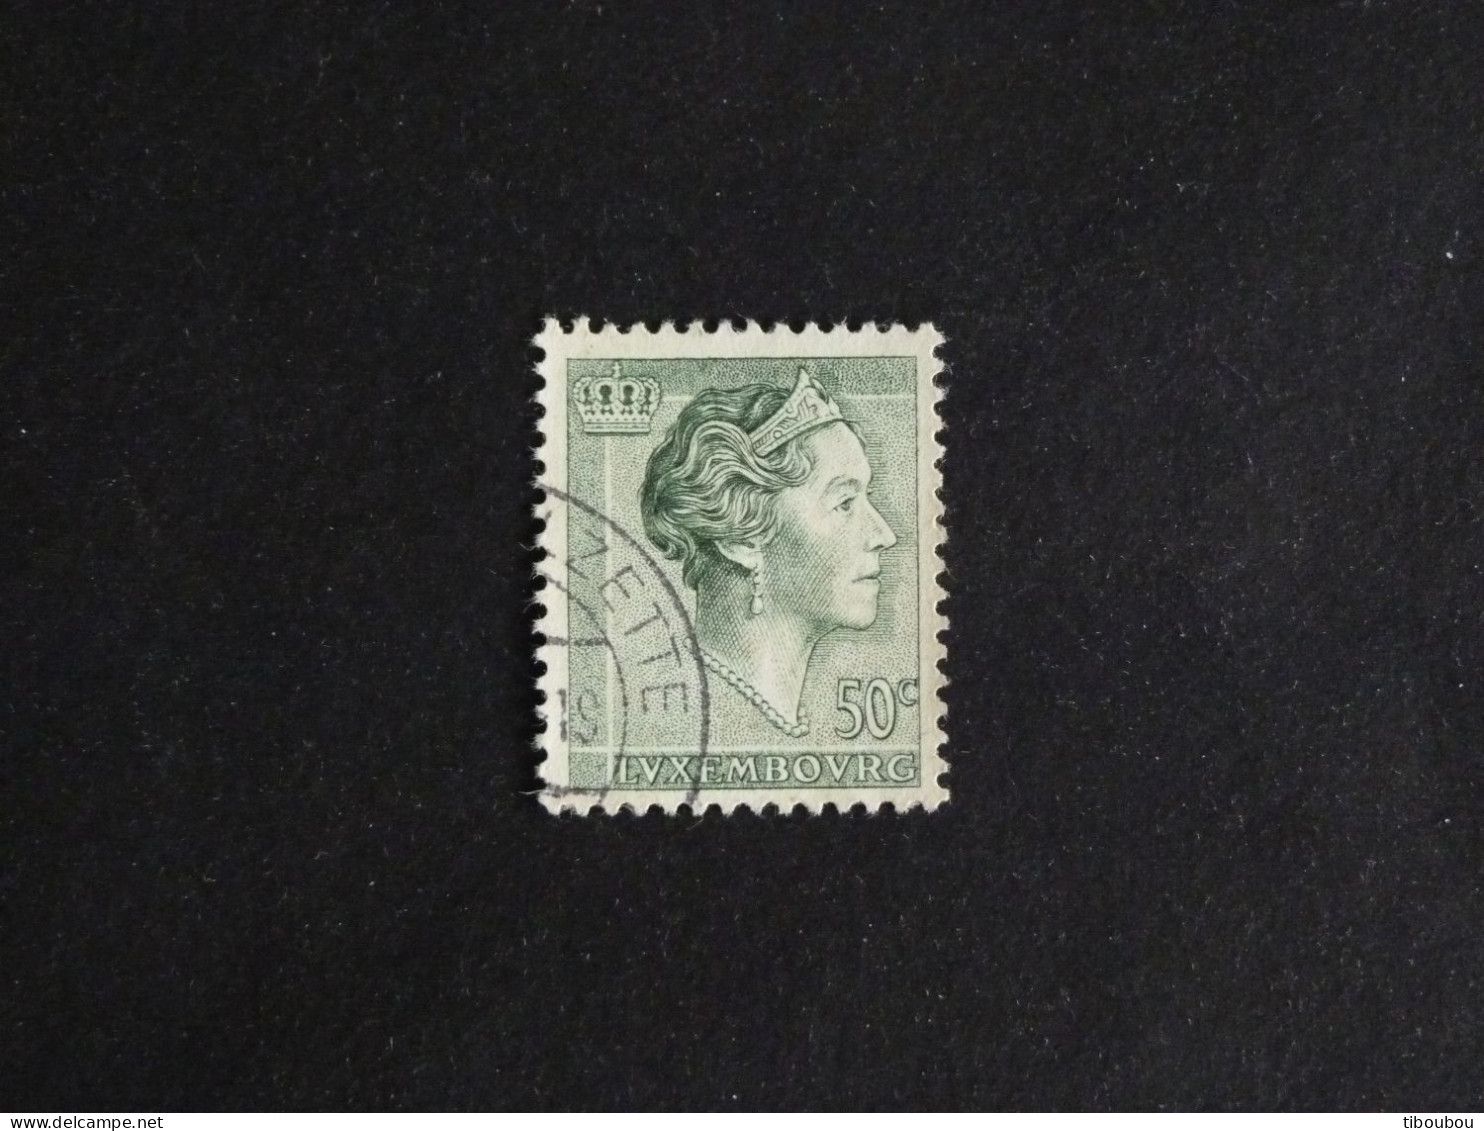 LUXEMBOURG LUXEMBURG YT 582 OBLITERE - GRANDE DUCHESSE CHARLOTTE - Used Stamps